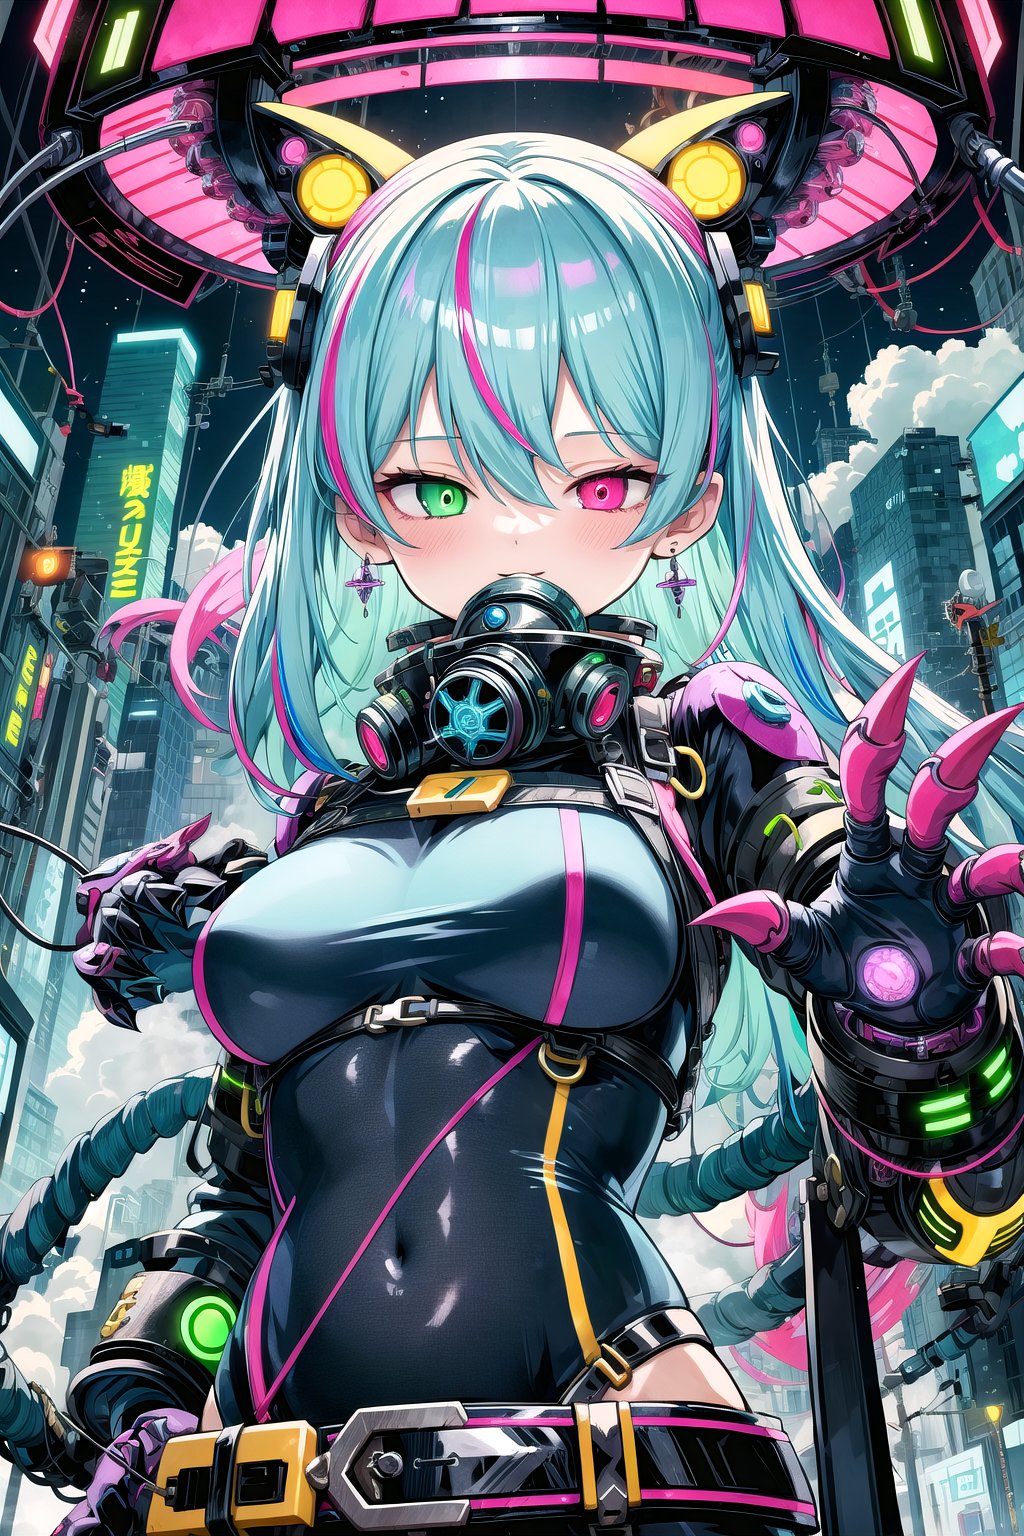 (Masterpiece), (highres), 8k, hyperdetailed, deep depth of field, motion blur, hirom1tsu, official alterate hairstyle, uique character concept, hair between eyes, hyperrealistc, hypnotizing green eyes, toxic, heterochromia, persona, devious, runge, punk girl, sassy, villain, claws, from below, mature female, bodysuit, blue and pink hair, goggles, steampunk, rajah hair, belt, perfect female figure, gorgeous, streaked hair, jacket, earrings, gas mask,cityscape, street, neon sign, glowing lines, neon trim, bloom, shadow, dynamic line of action, fighting stance, cybernetic woman, nature, overgrown, augmentation, cable, mechanical parts, steam, dynamic posture, (working), wire, futuristic, sci-fi, metallic skin, chrome, cube, glowing, sci-fi, otherworldly, upper body, half-closed eyes, serene, alien architecture, scenery,sugar_rune,1 girl,gpts style<lora:EMS-12734-EMS:0.500000>, <lora:EMS-91280-EMS:0.500000>, <lora:EMS-352161-EMS:0.900000>